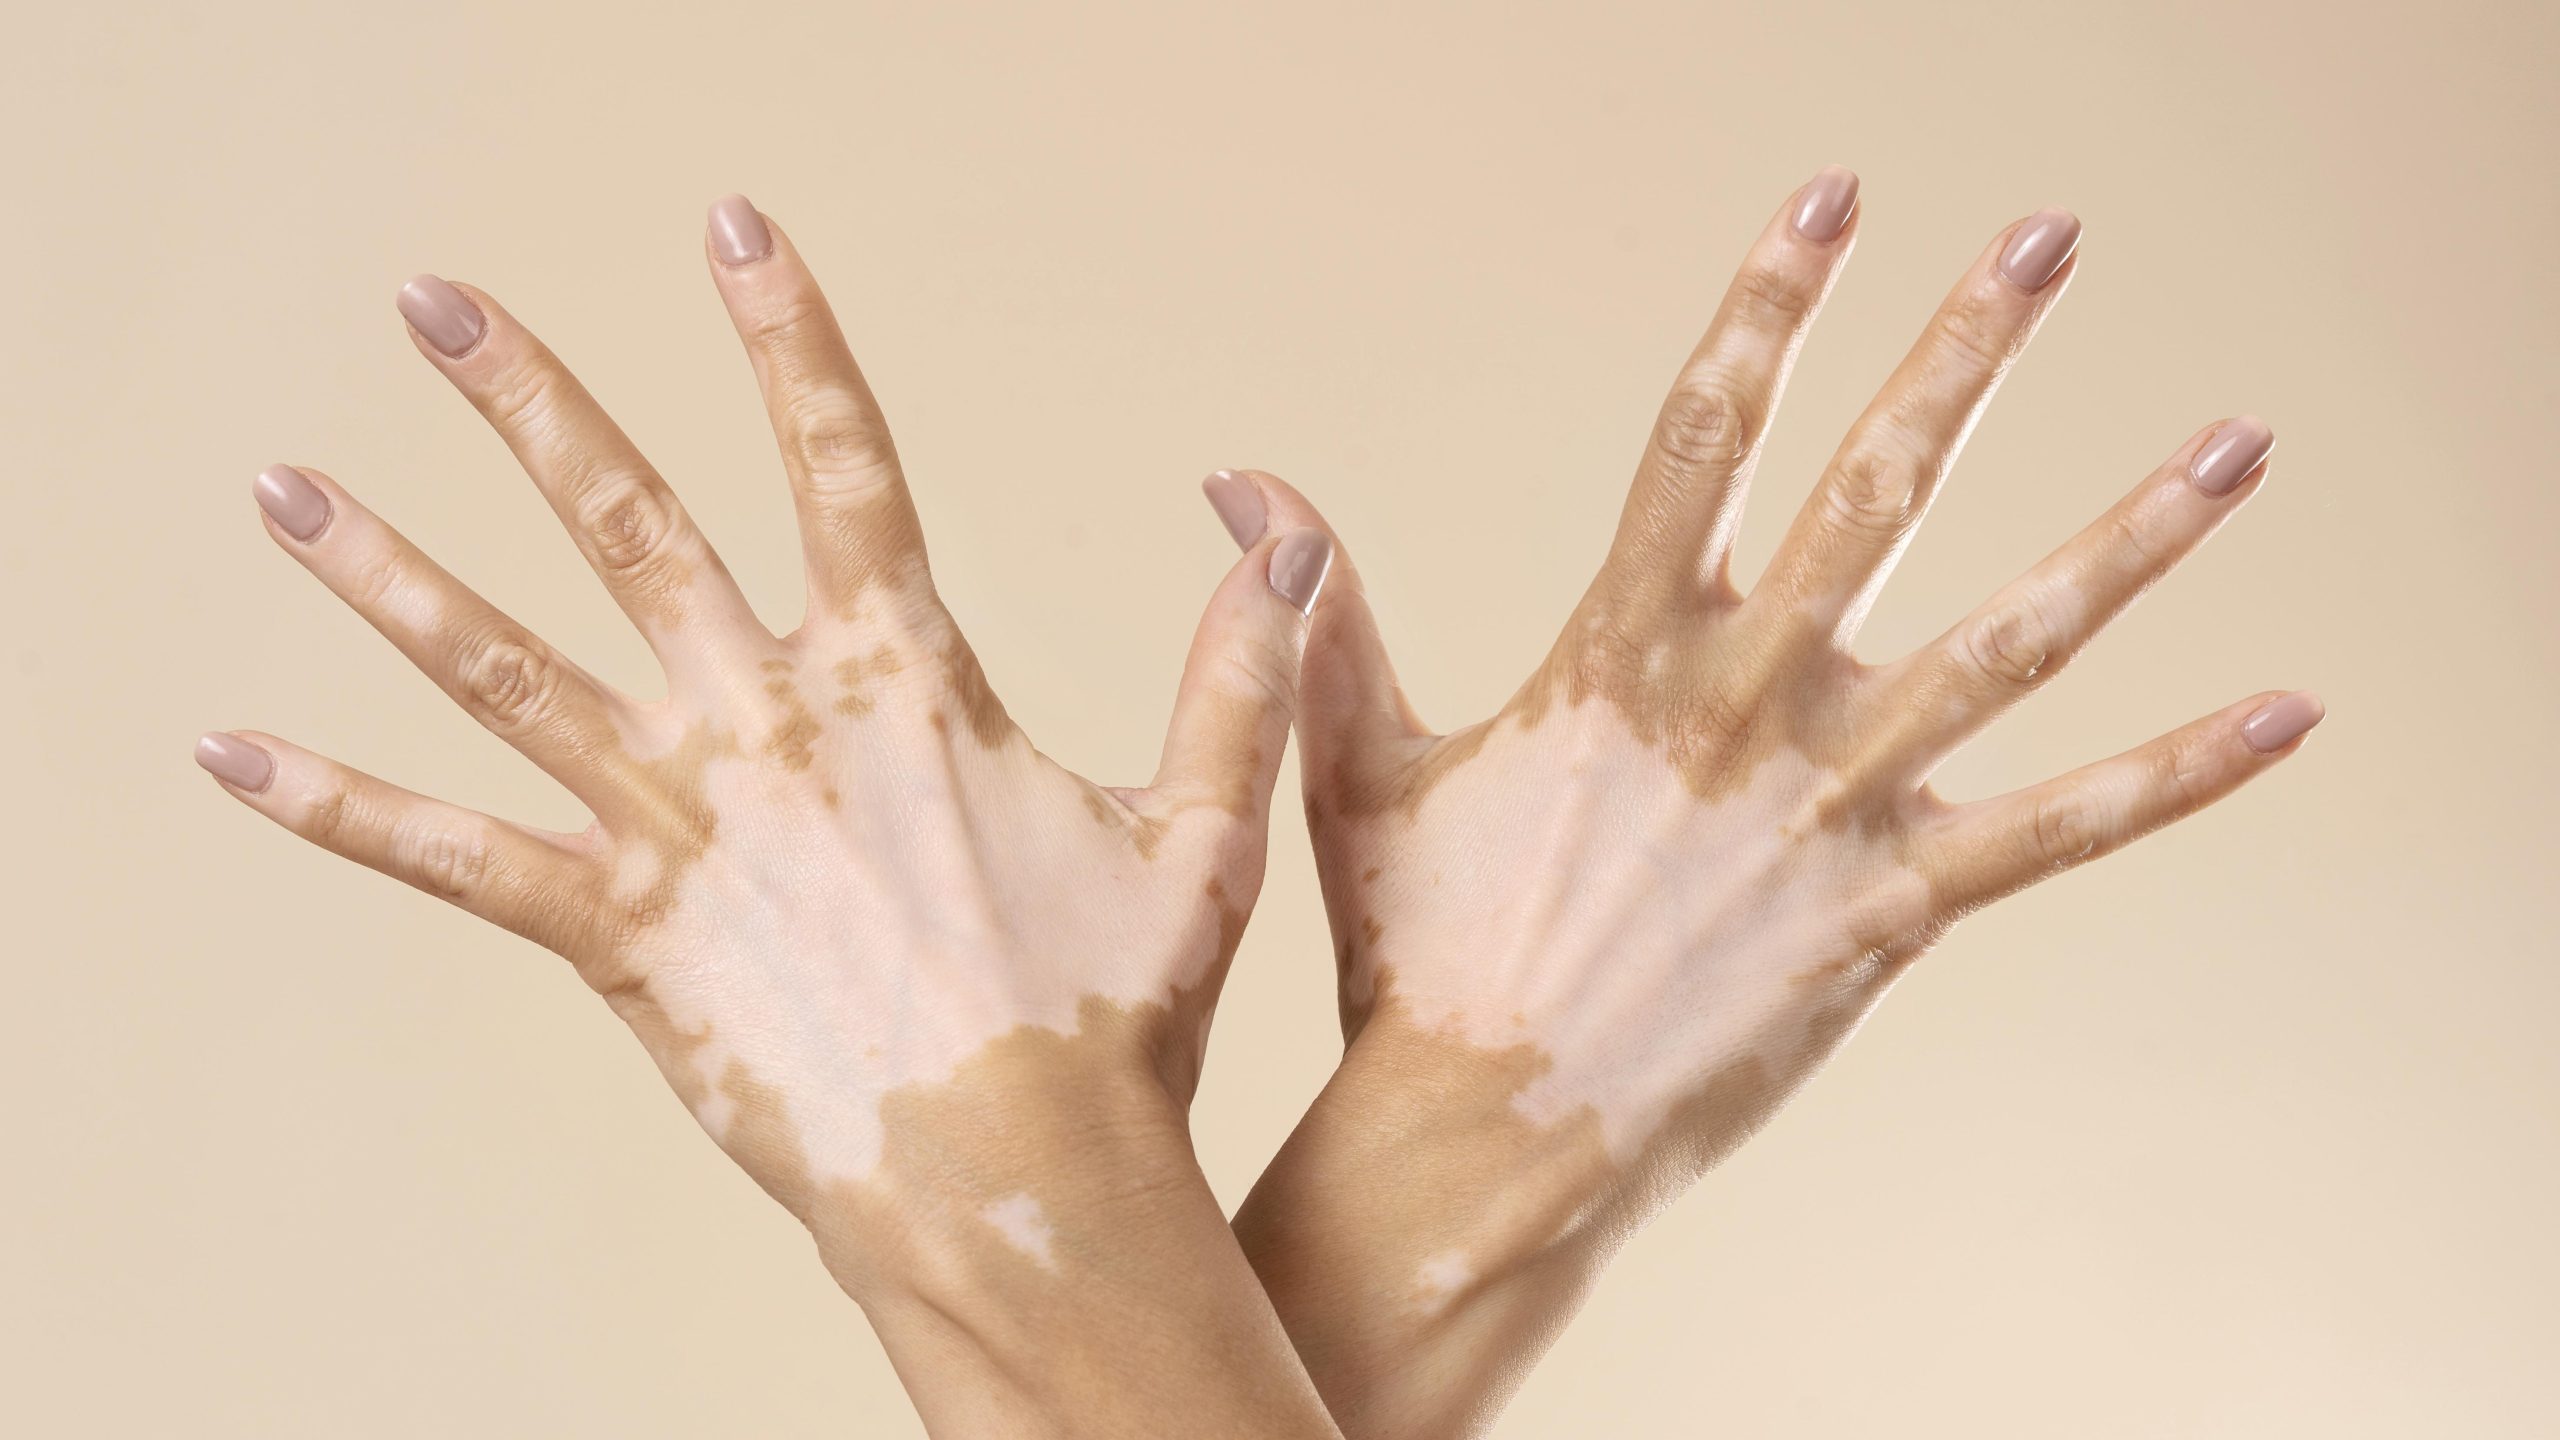 Can Vitiligo Spread From One Person To Another?